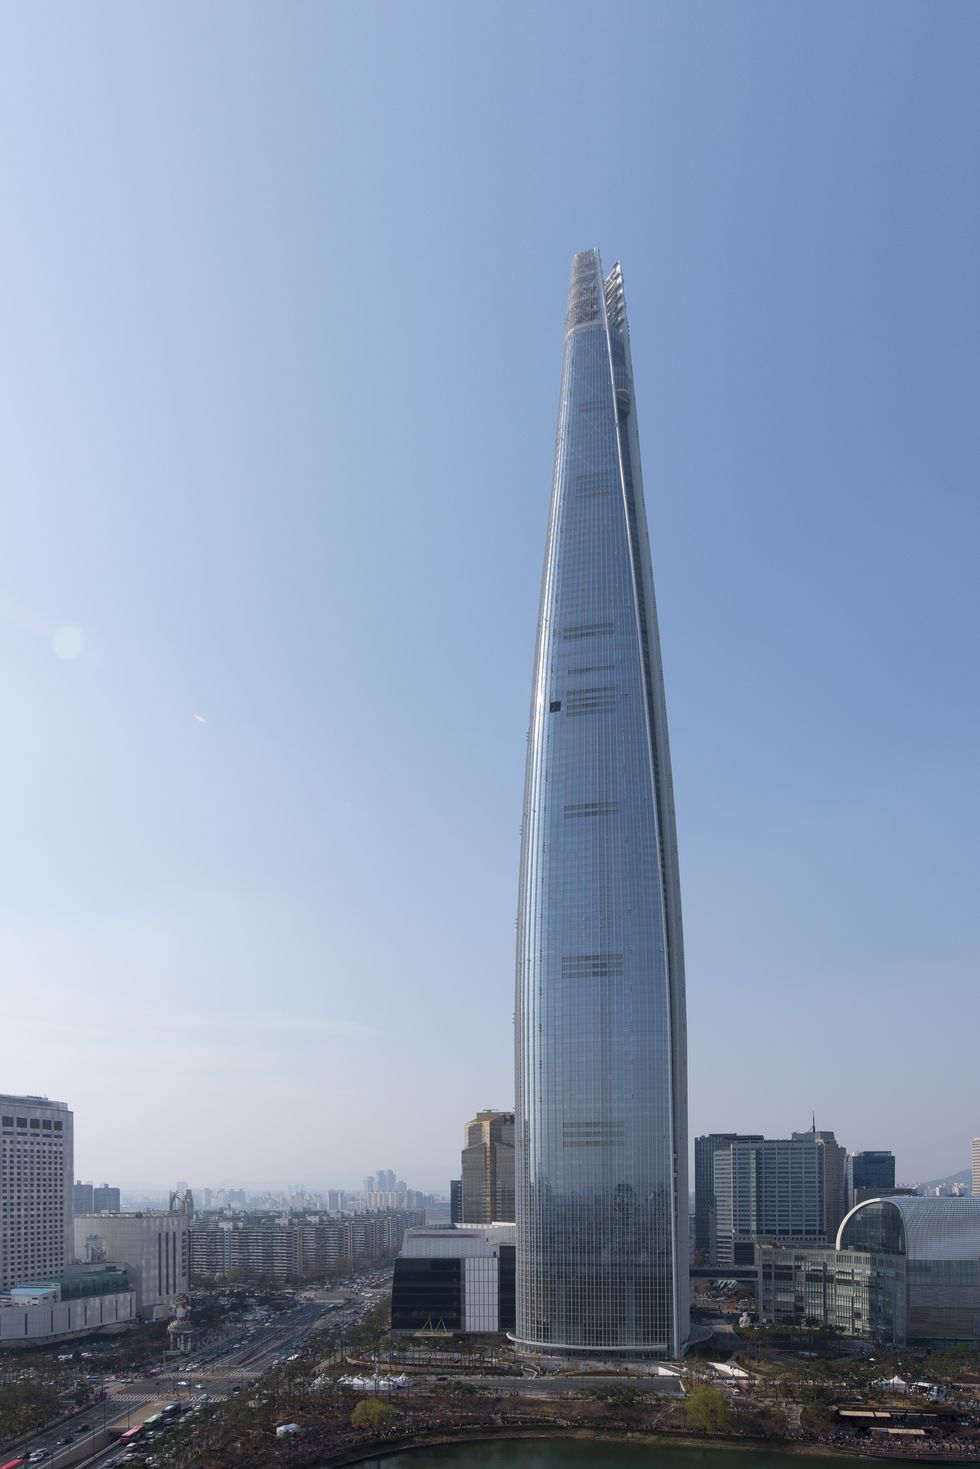 31 Tallest Buildings in the World